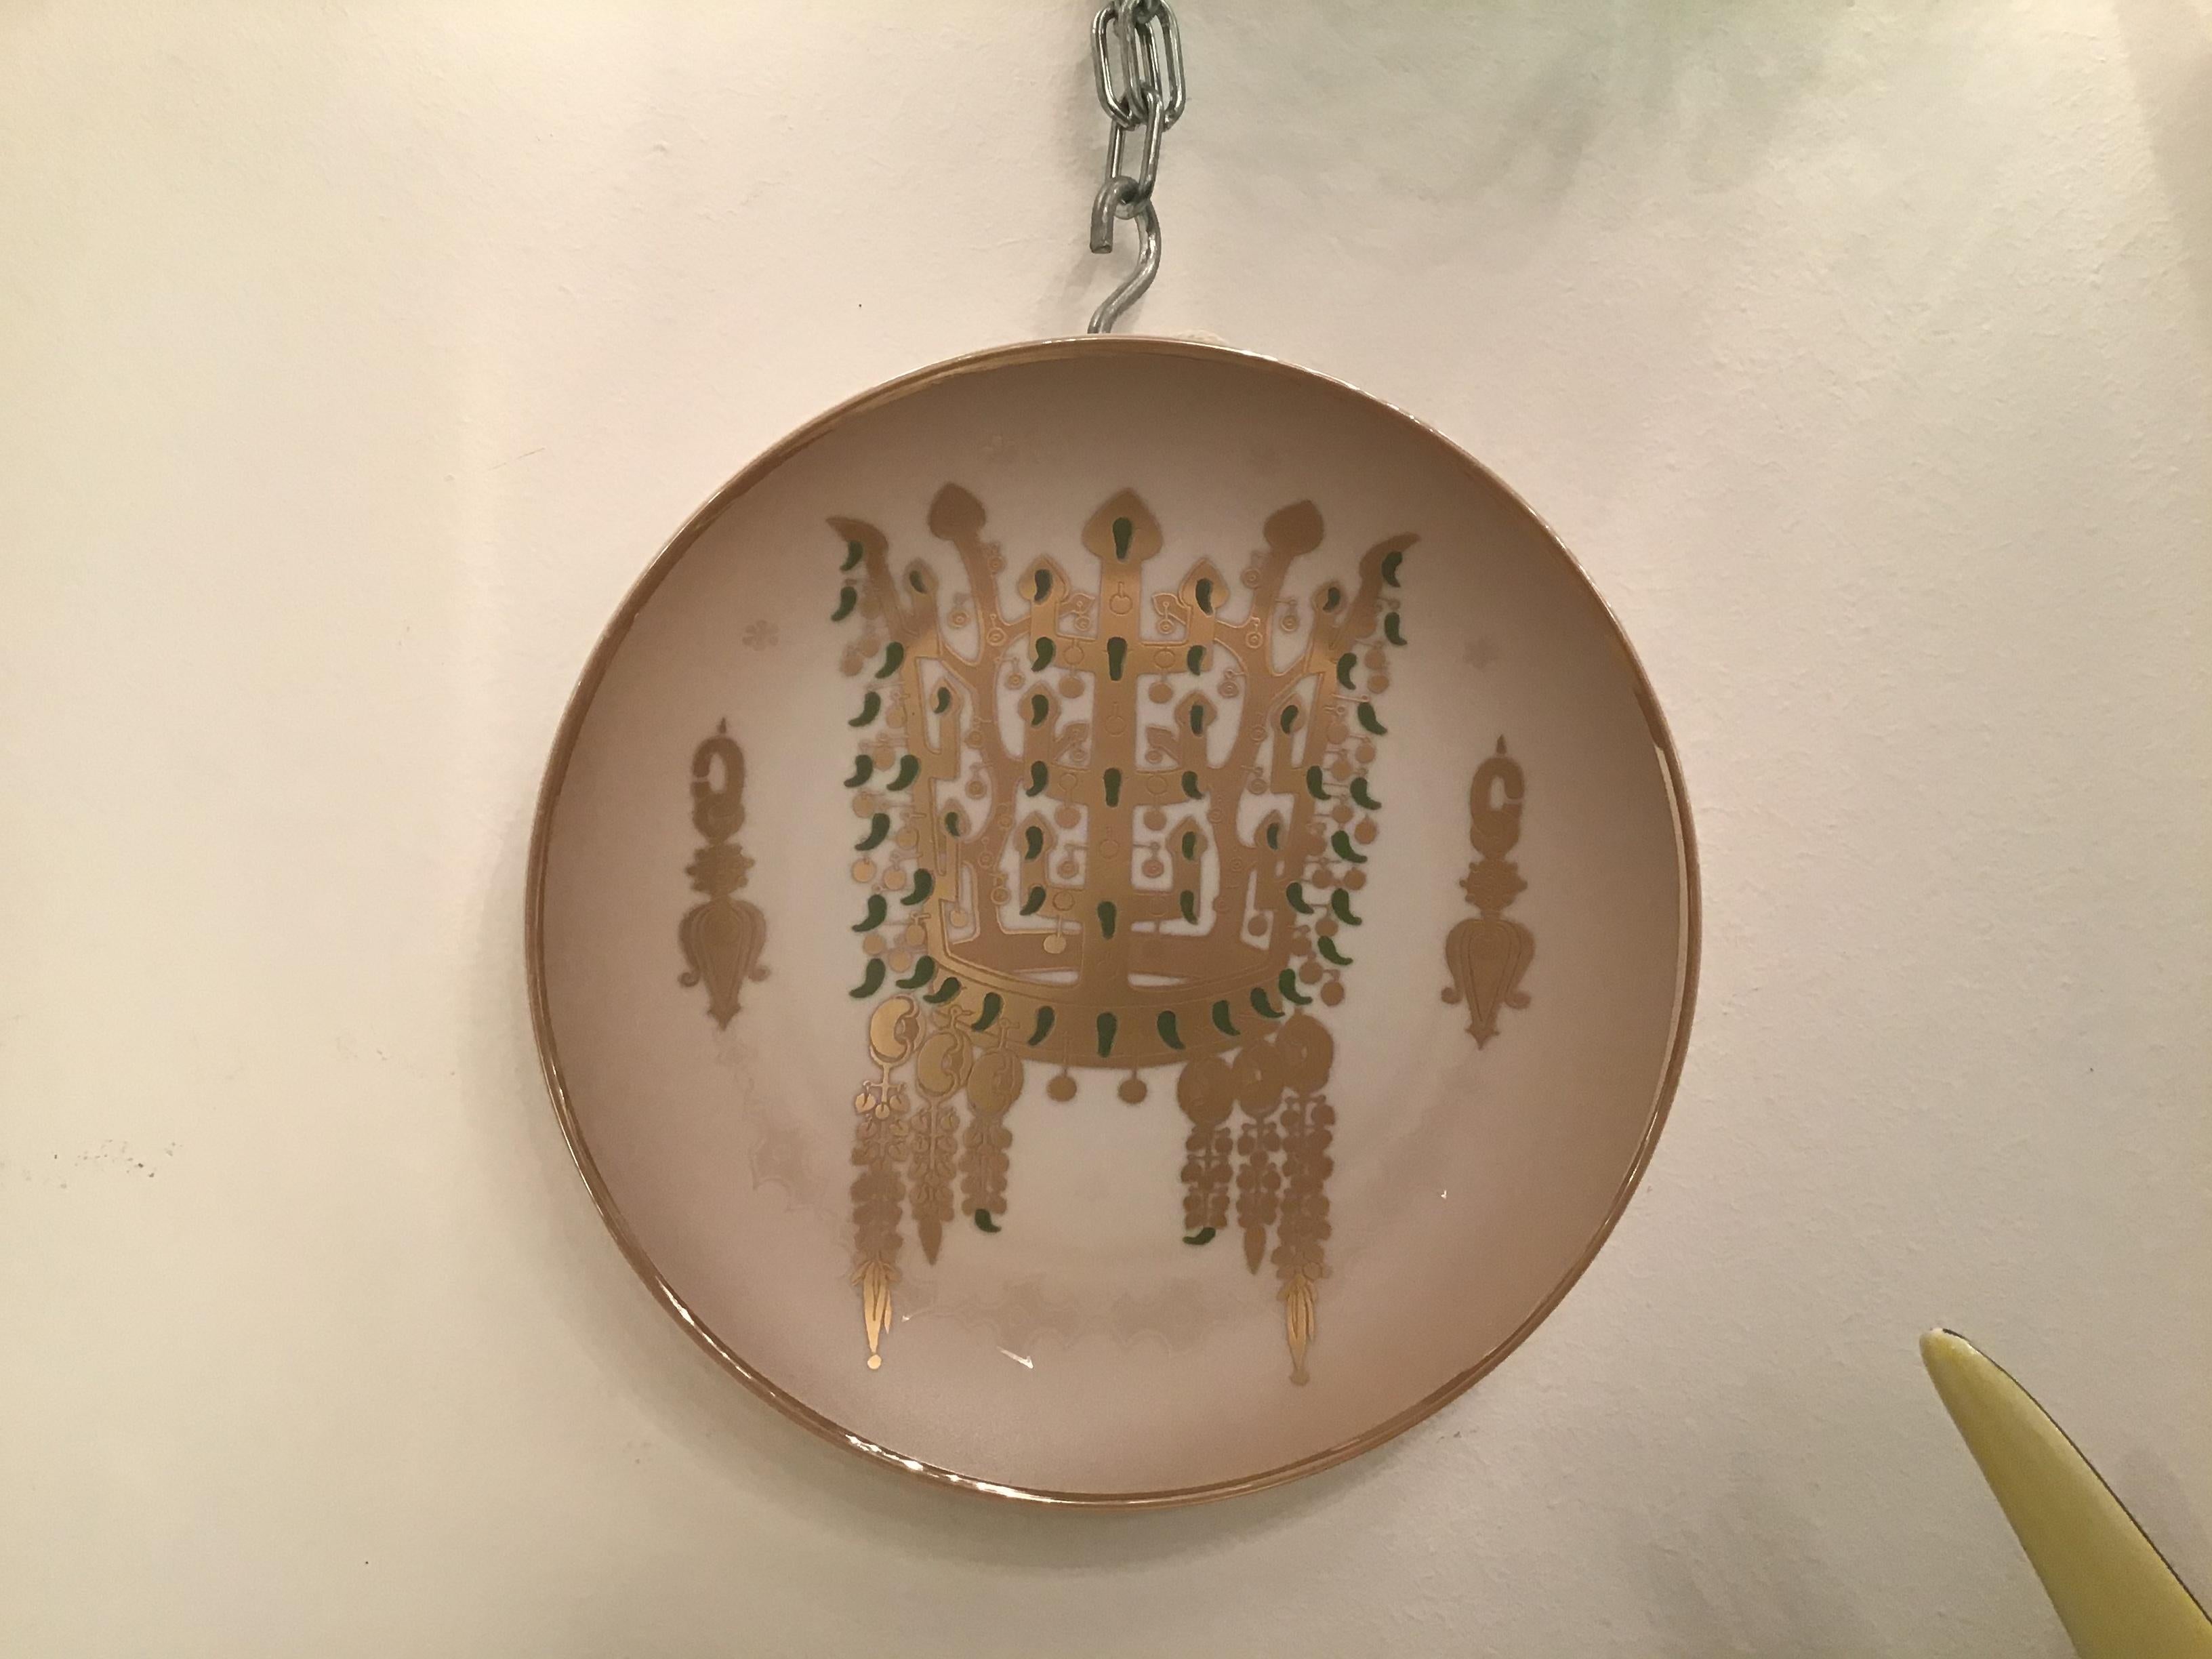 Morbelli Porcelain “Dinastia Silla” Wall Plates Worked with Pure Gold 1960 Italy For Sale 9